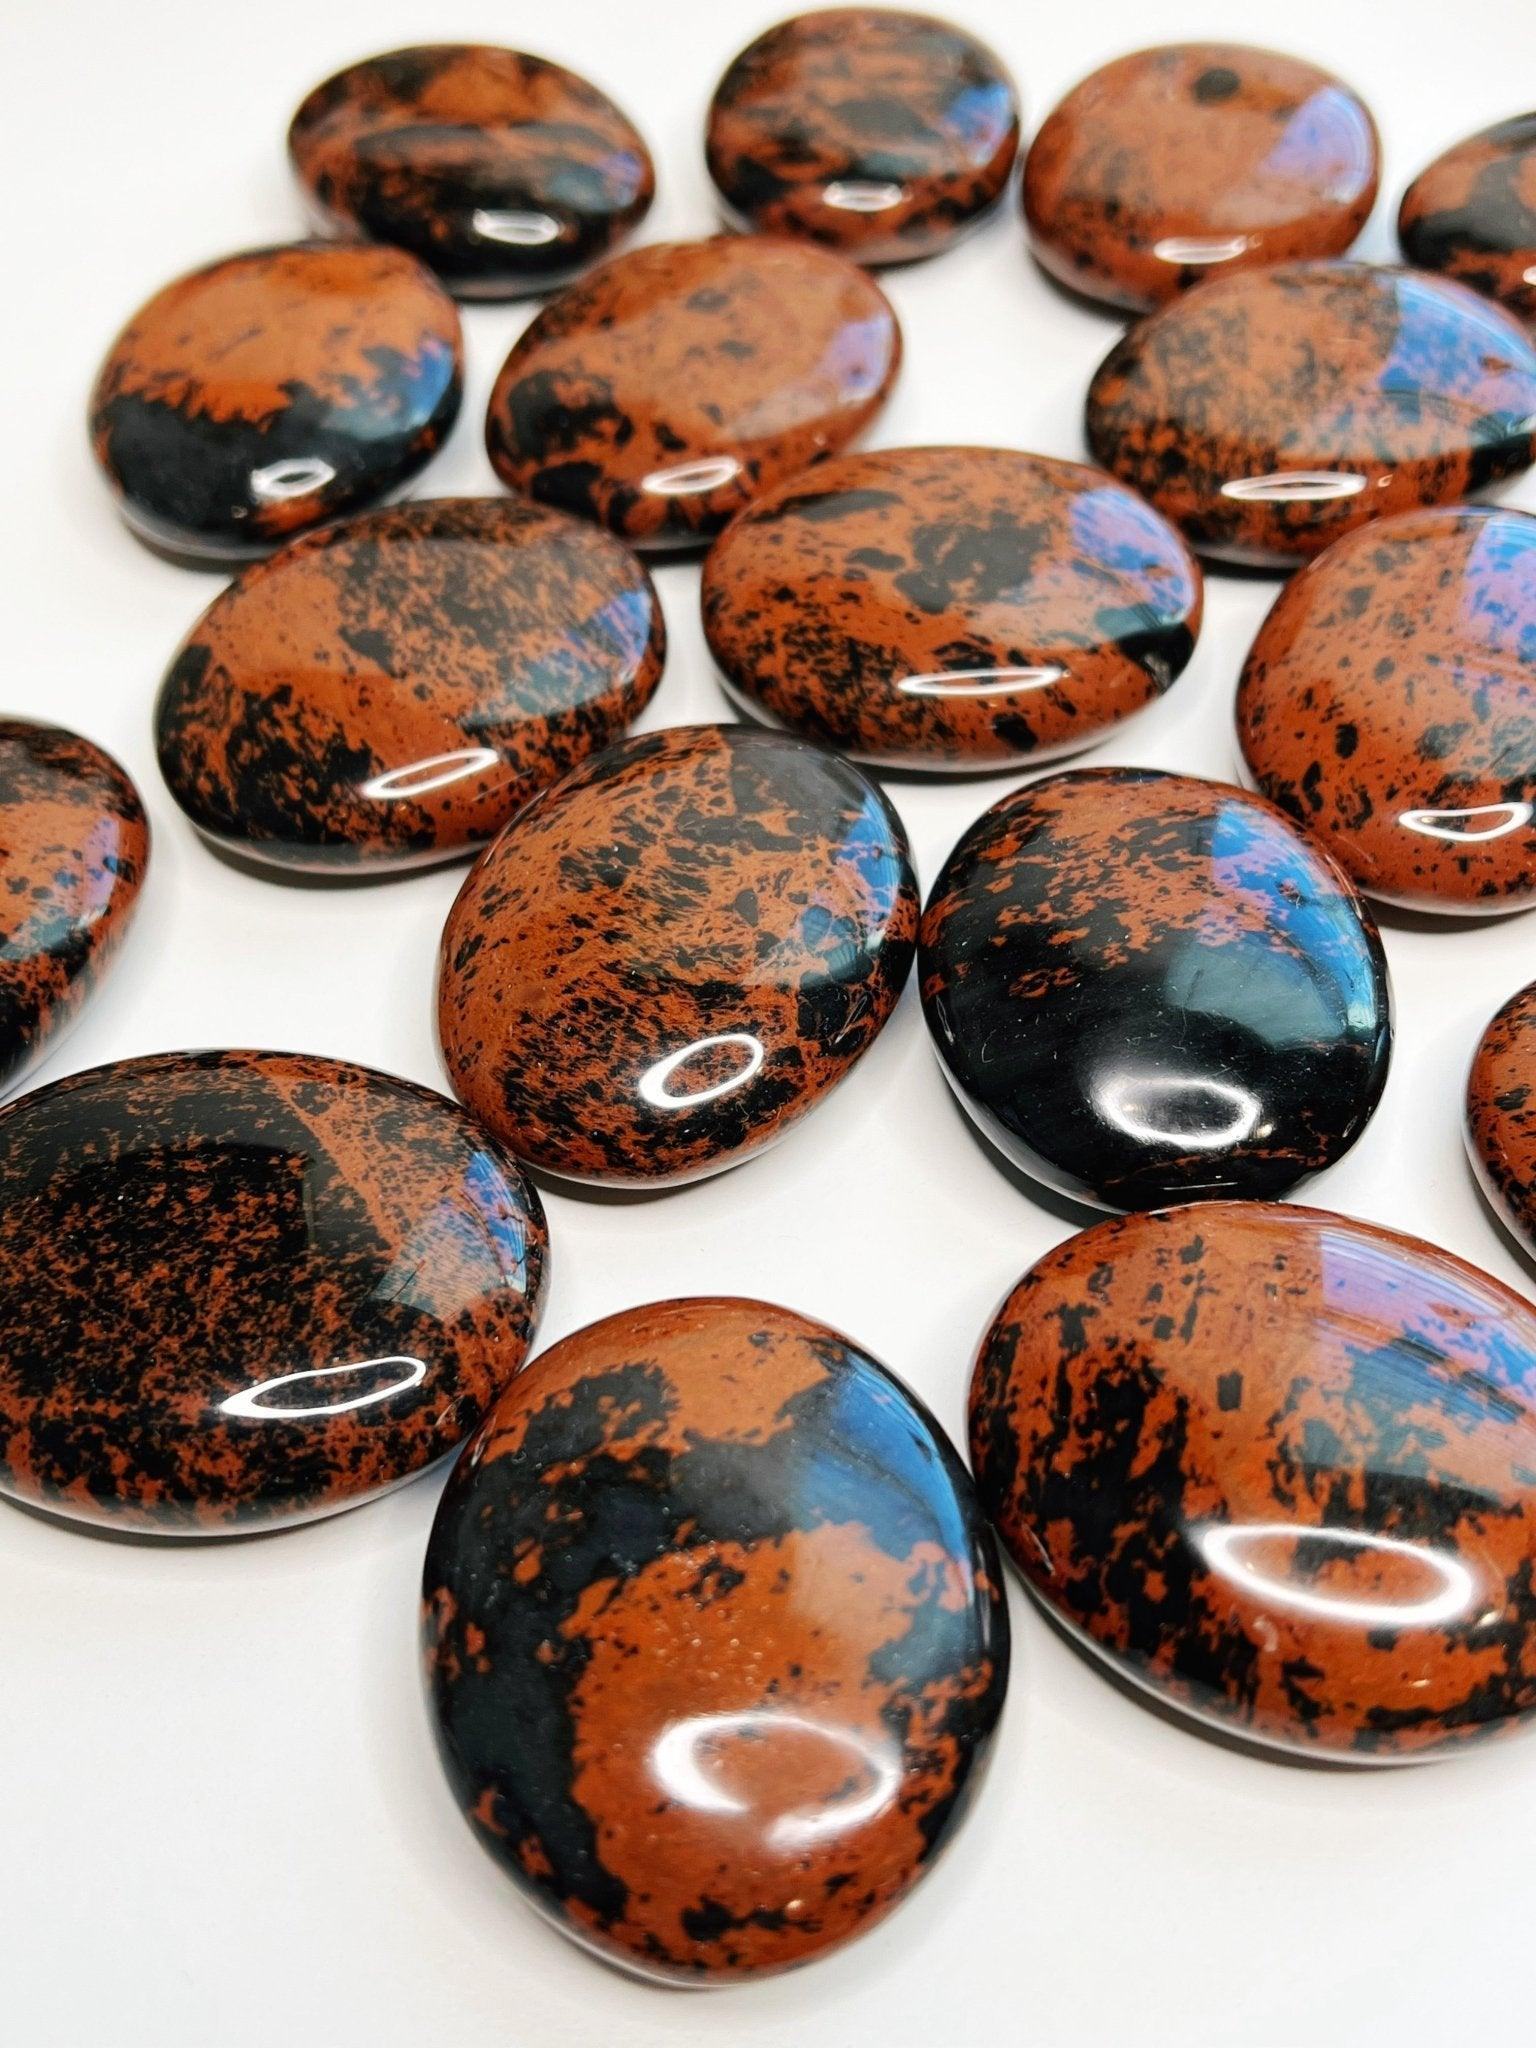 MAHOGANY OBSIDIAN PALM STONE - 33 bday, 444 sale, end of year sale, flash sale, holiday sale, mahogany obsidian, new year sale, obsidian, palm, palm stone, polished, protection gift bundle - The Mineral Maven